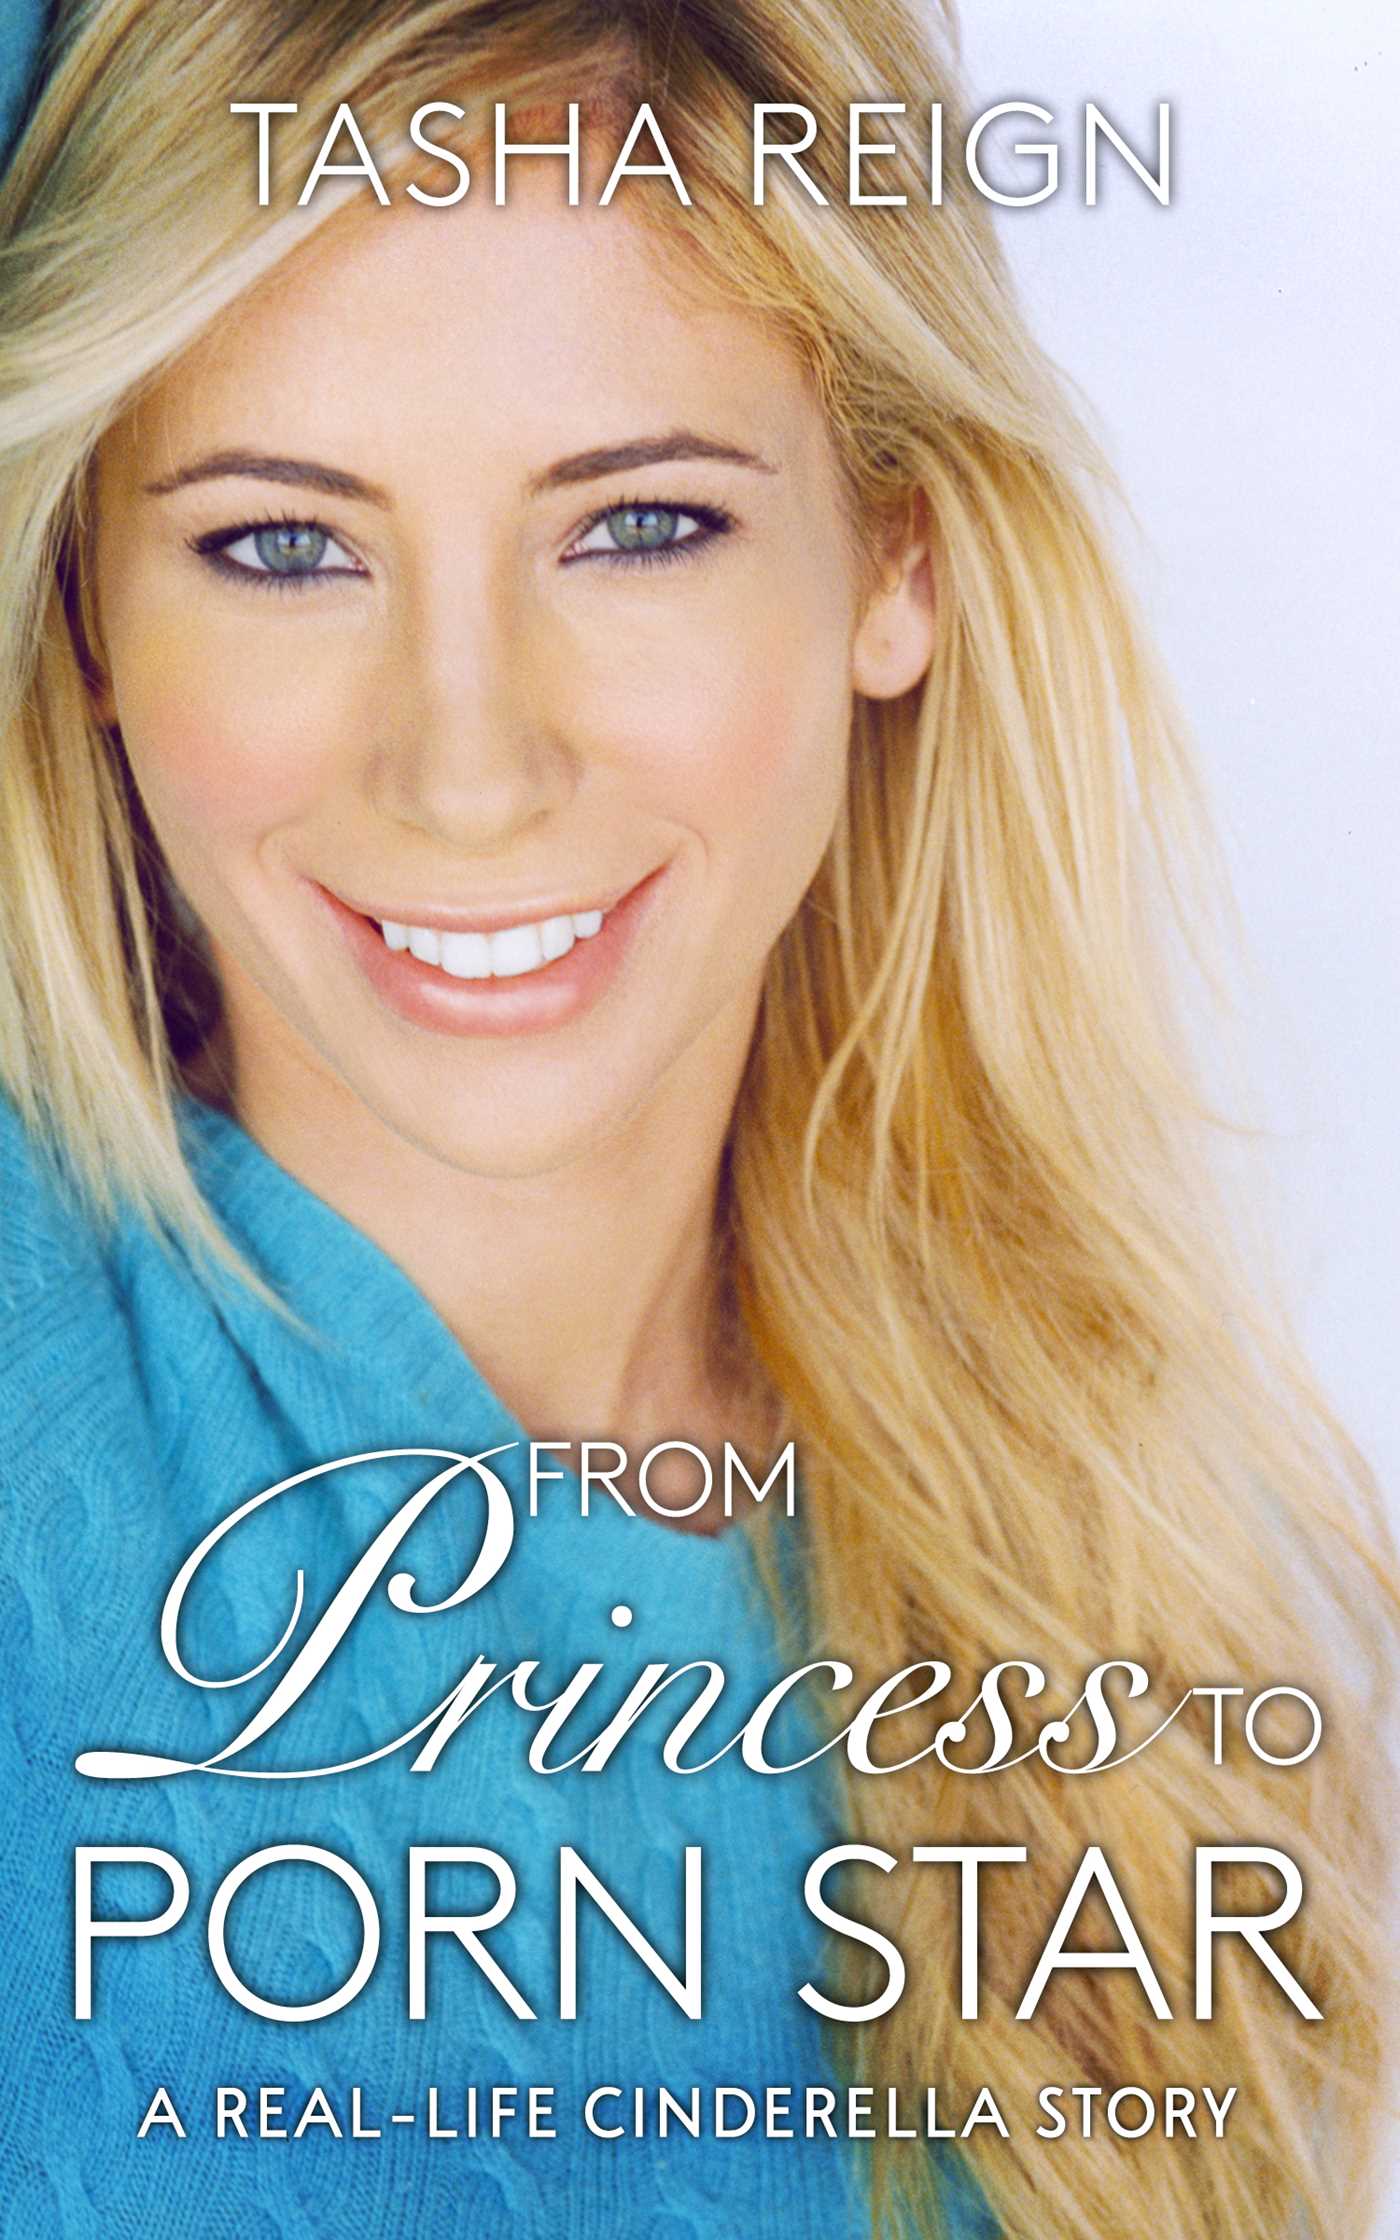 From Princess To Porn Star | Book by Tasha Reign | Official ...